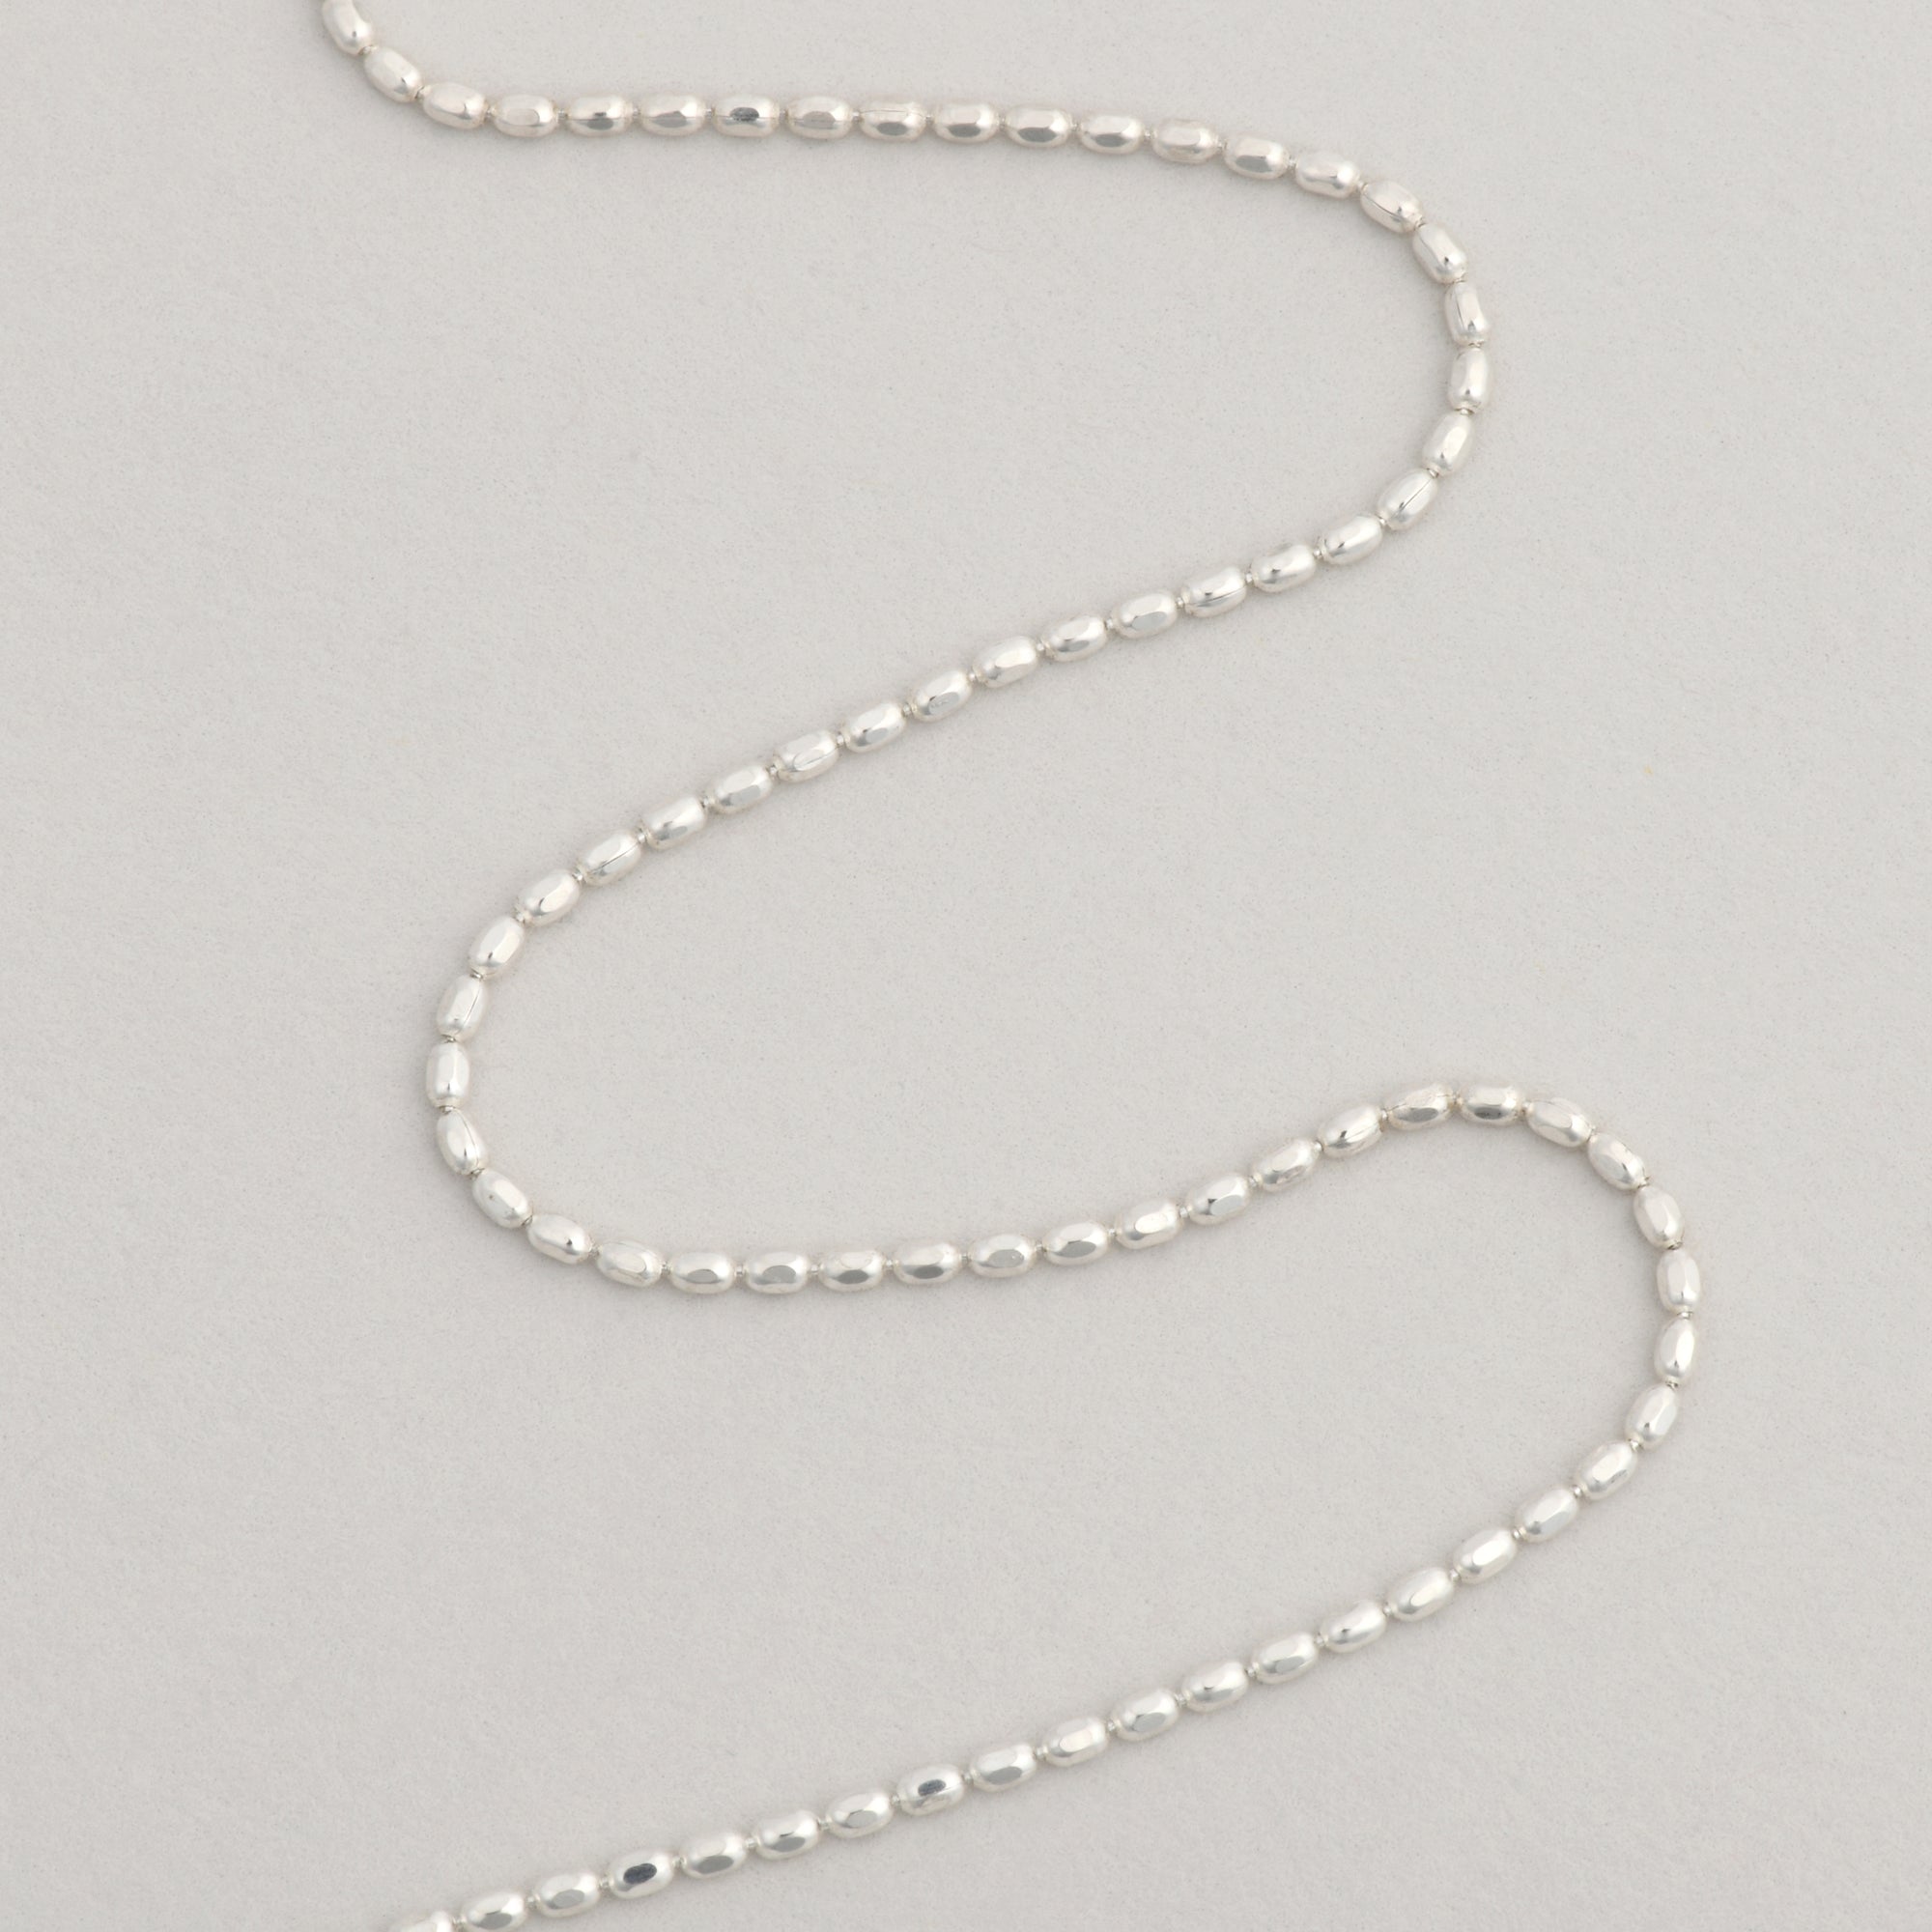 aesthetic silver beaded necklace on grey background